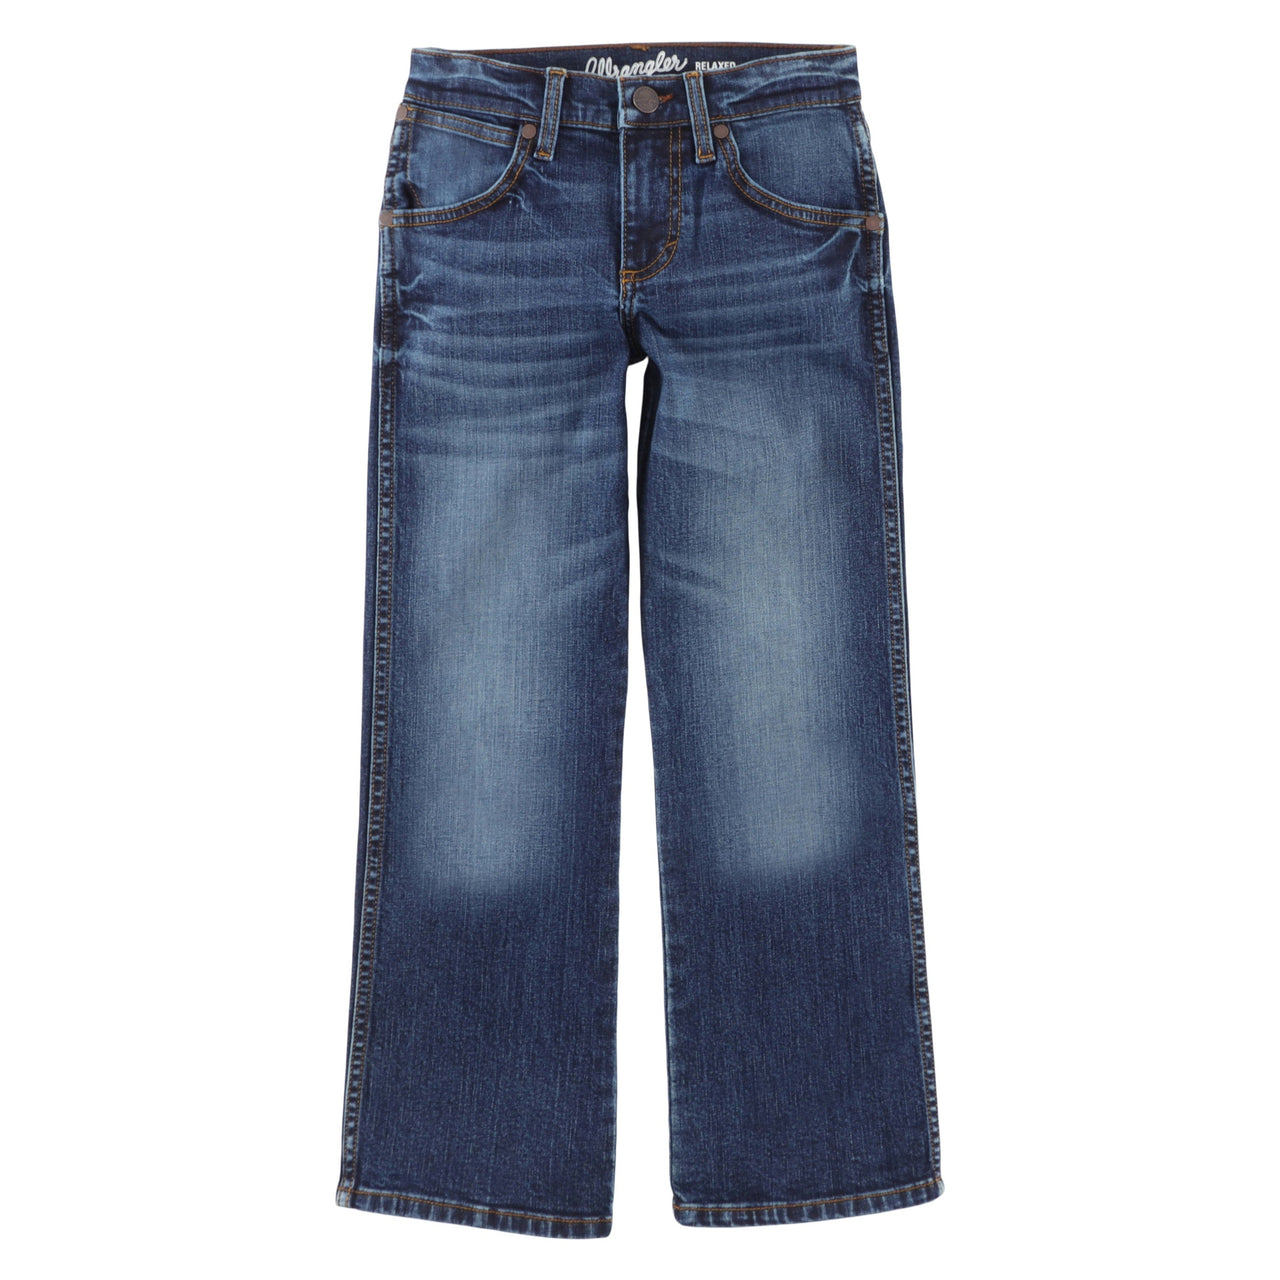 Wrangler Boy's Retro Relaxed Bootcut Jeans - Dellwood